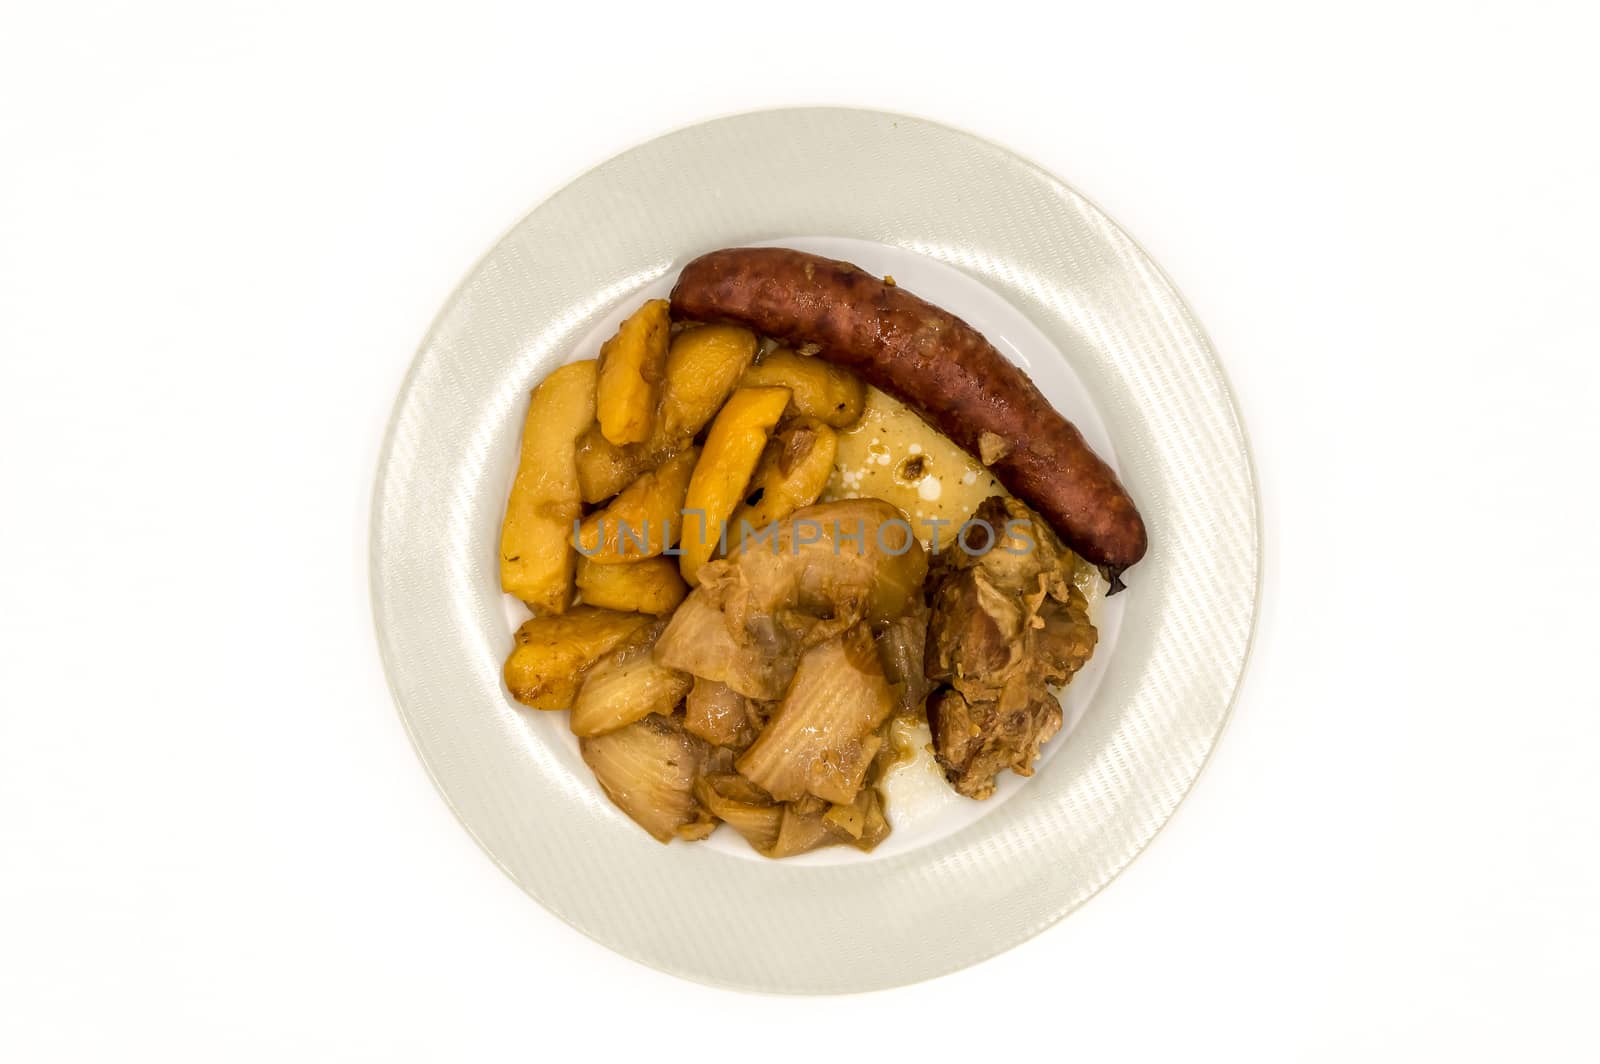 Plate of scorched white cabbage with sausage, potatoes and a piece of lamb viewed from above on a white background